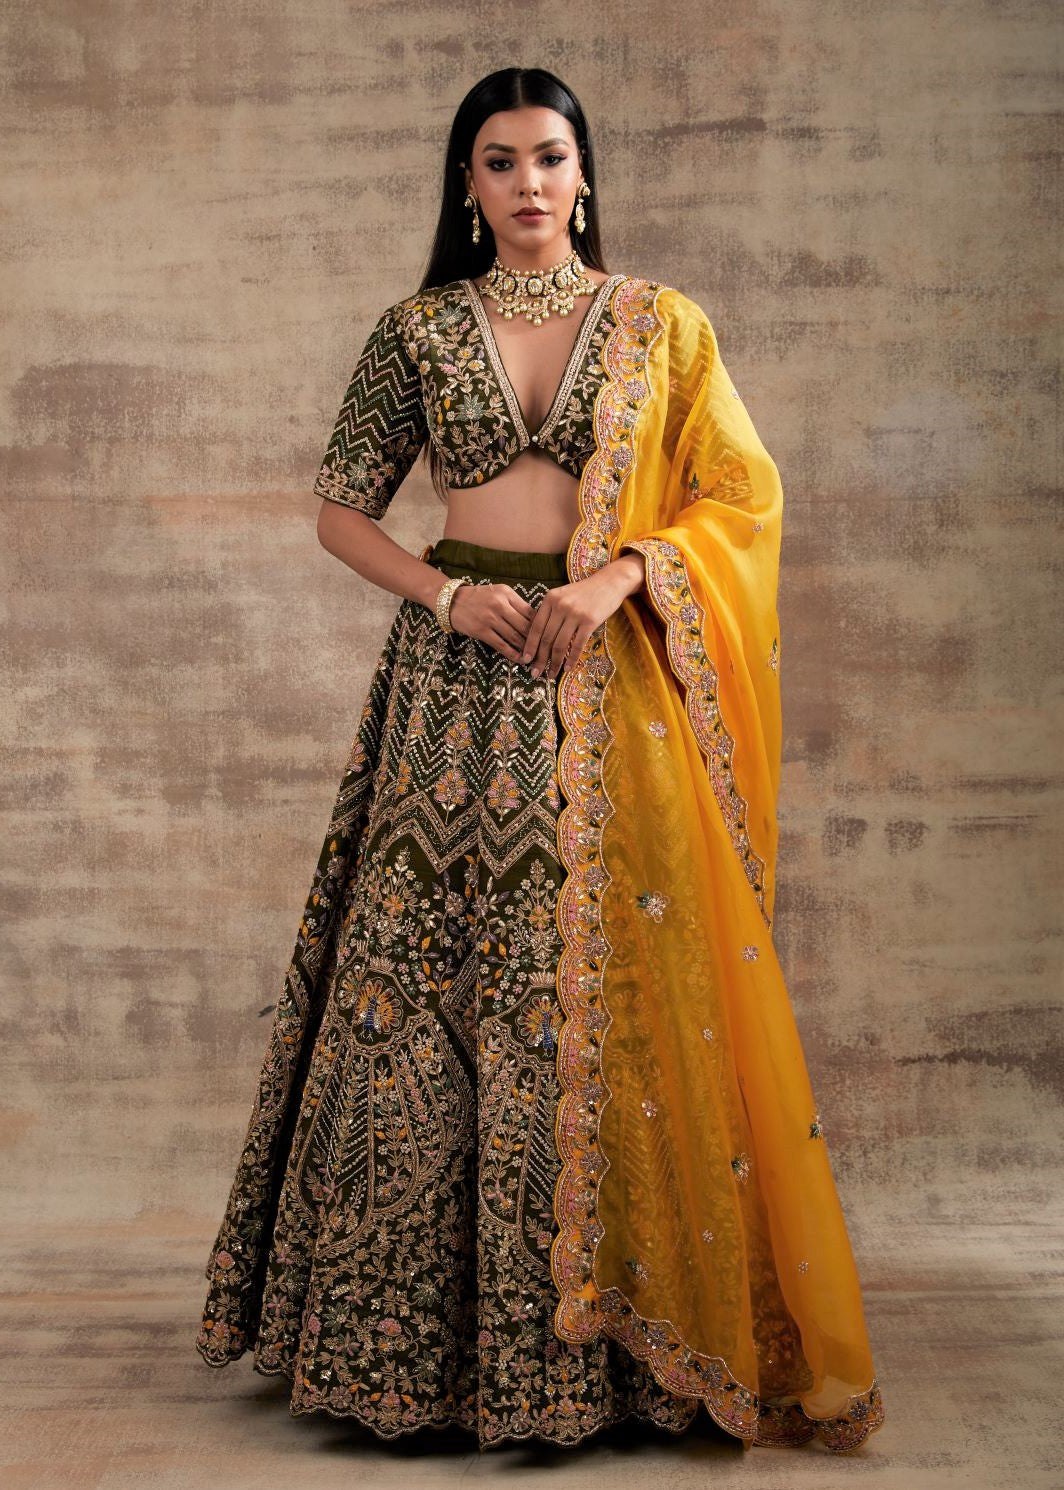 Bhumi Pednekar exudes regal vibes in a stunning olive green and golden  lehenga | Times of India